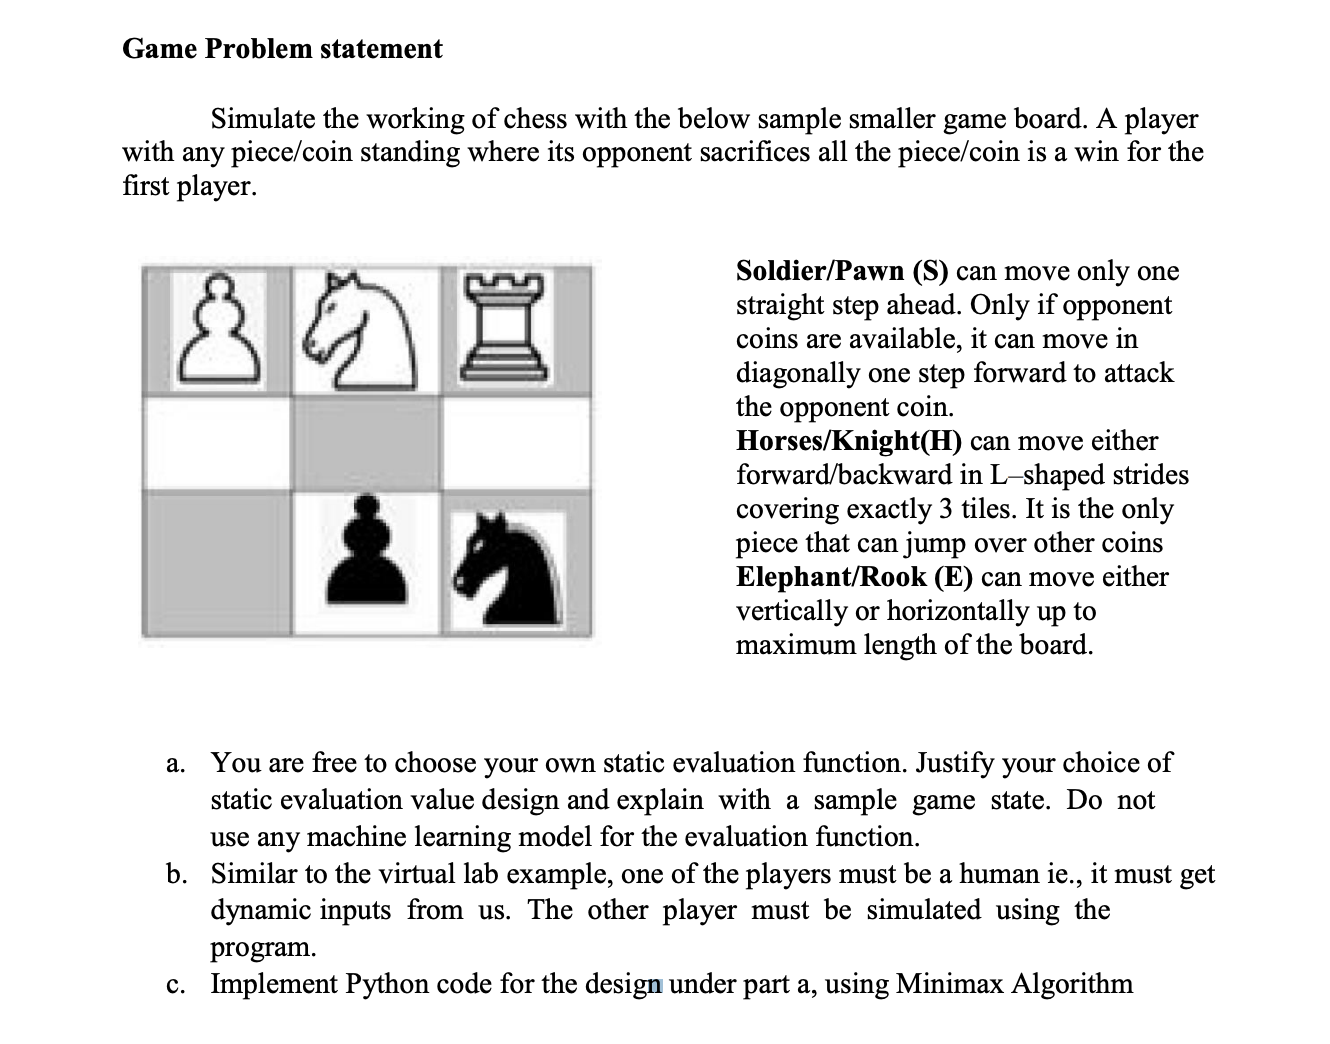 Solved PYTHON CODE: Use inheritance to place a random chess